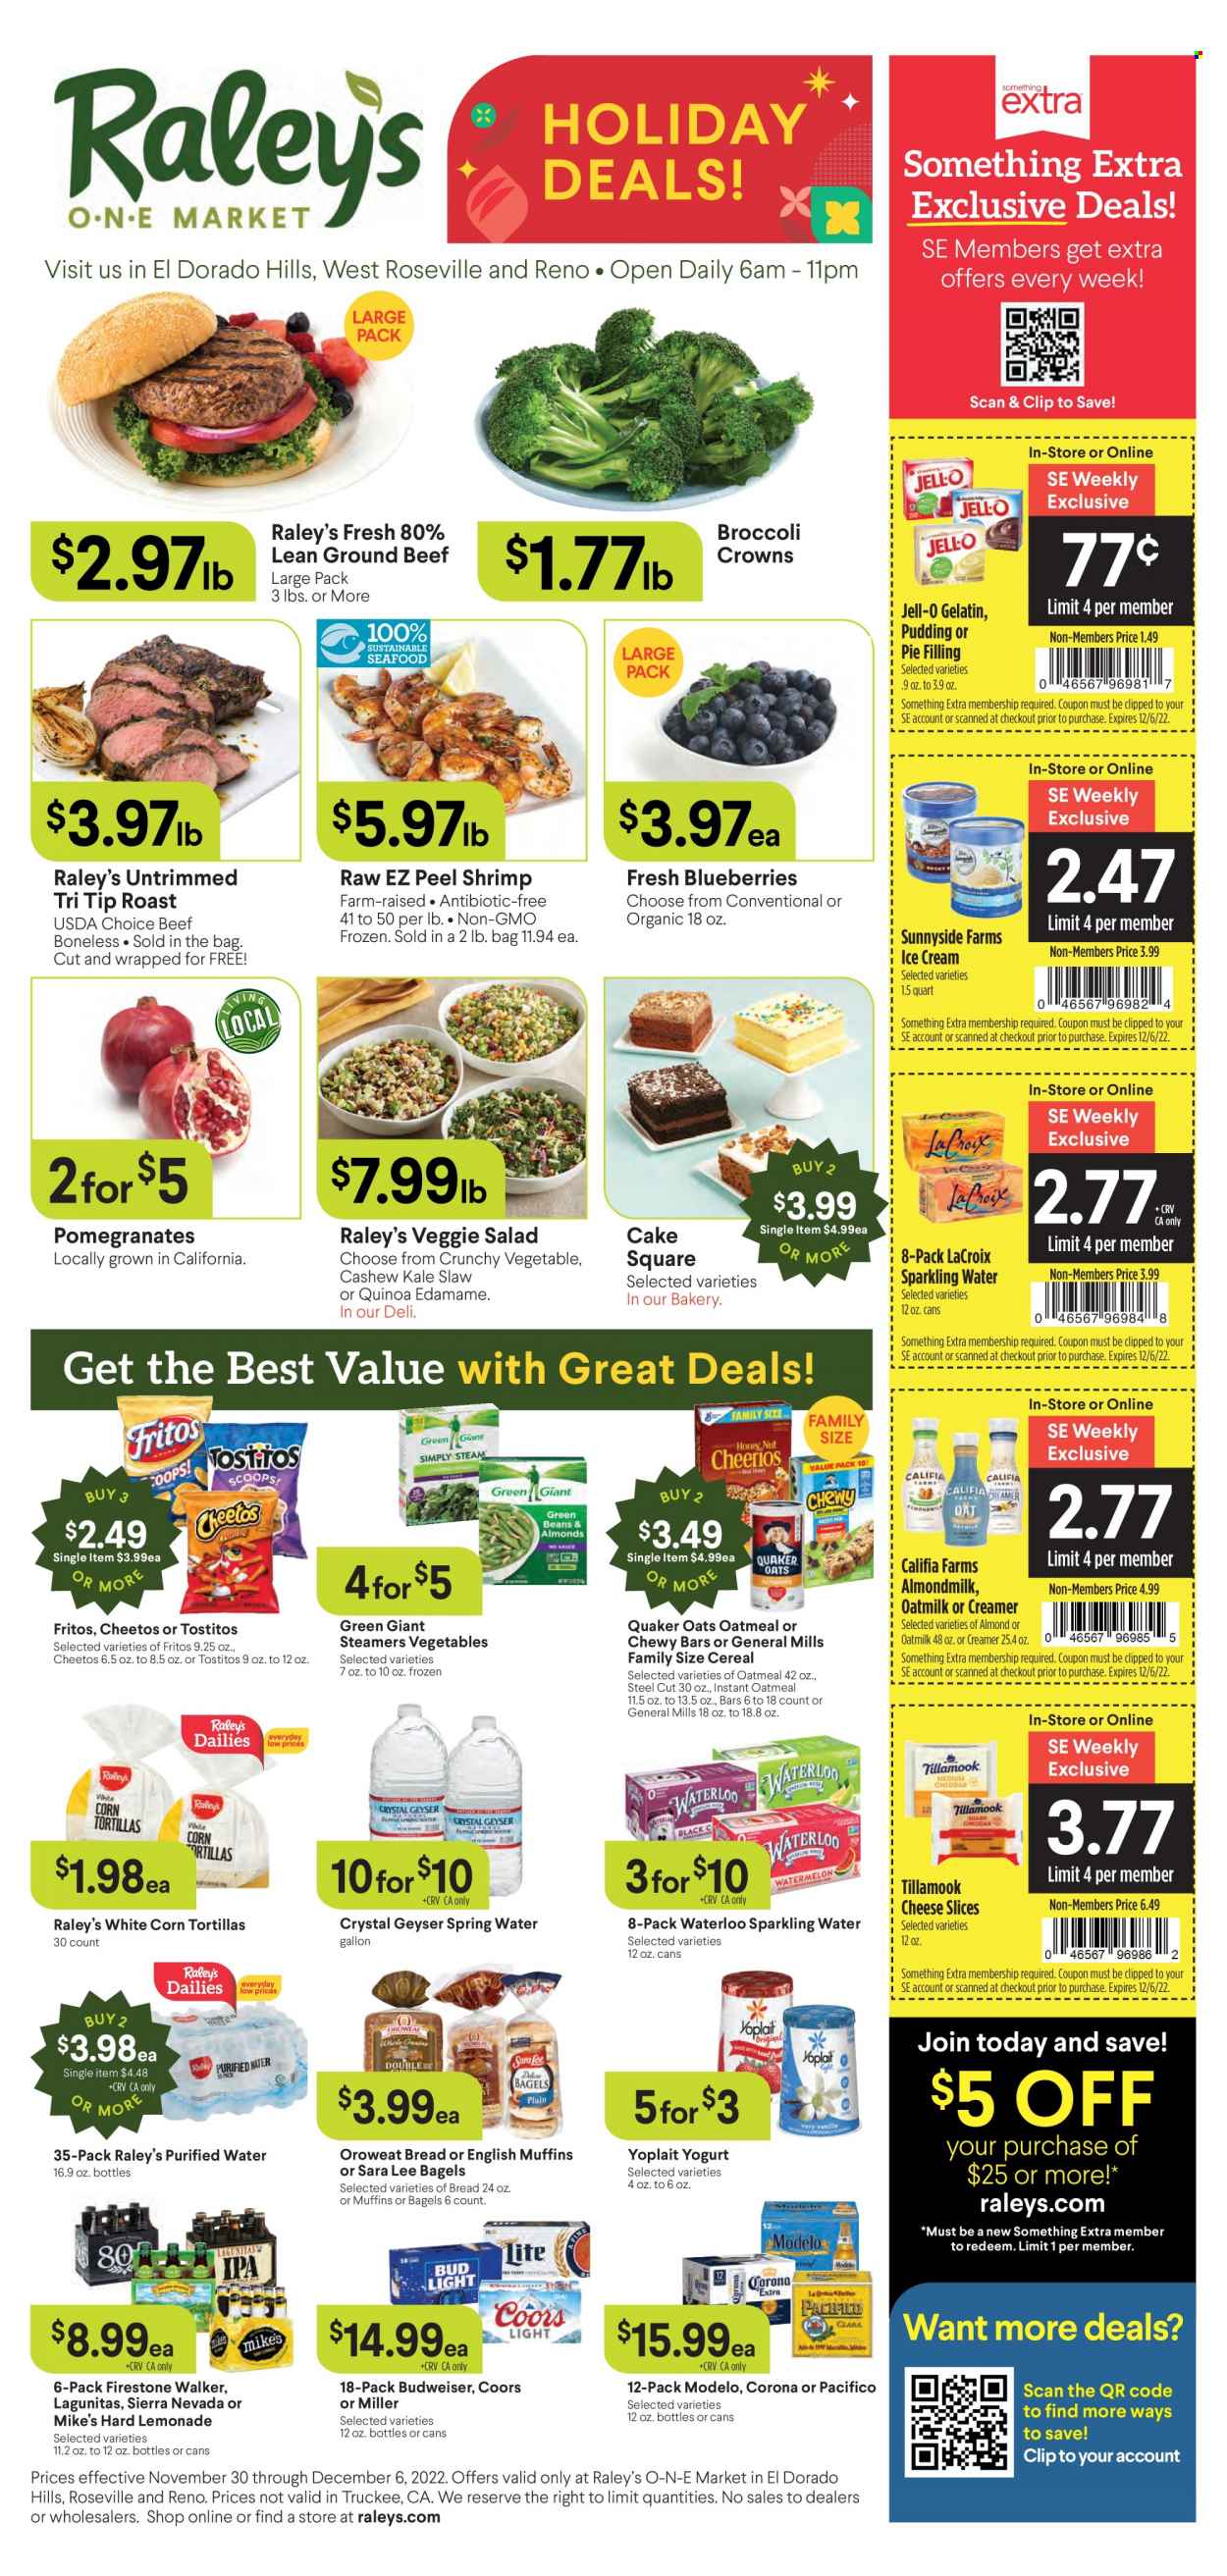 thumbnail - Raley's Flyer - 11/30/2022 - 12/06/2022 - Sales products - bagels, bread, corn tortillas, english muffins, tortillas, cake, Sara Lee, Edamame, kale, salad, shrimps, Quaker, sliced cheese, cheese, pudding, yoghurt, Yoplait, almond milk, oat milk, creamer, ice cream, Fritos, Cheetos, Tostitos, pie filling, oatmeal, oats, Jell-O, cereals, quinoa, lemonade, spring water, sparkling water, purified water, beer, Corona Extra, Miller, Modelo, Firestone Walker, beef meat, ground beef, Budweiser, Coors, pomegranate. Page 1.